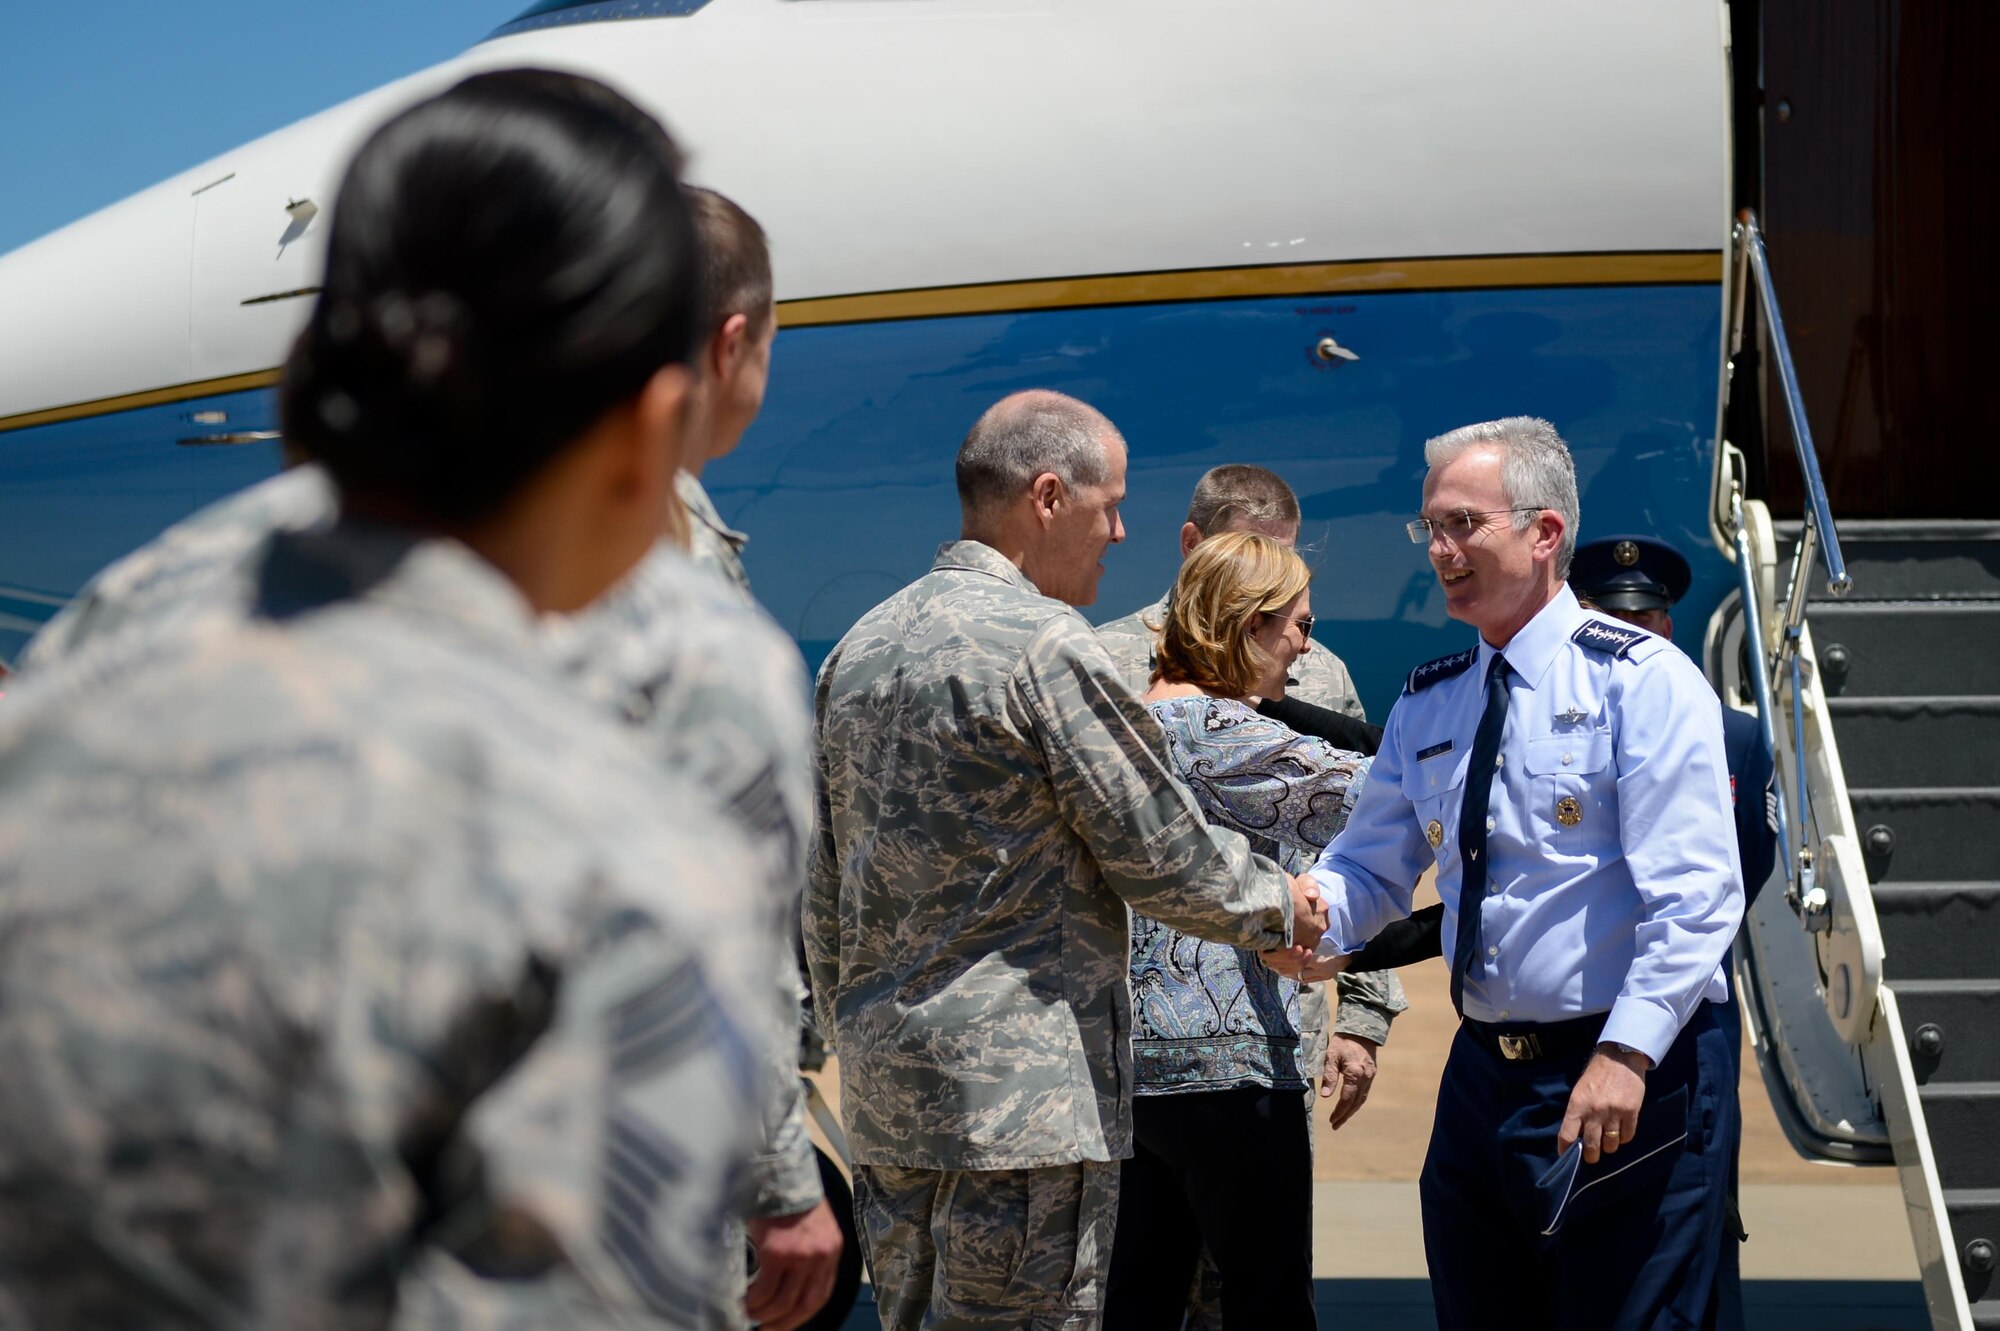 Gen. Robin Rand, commander of Air Force Global Strike Command, and Maj. Gen. Thomas Bussiere, Eighth Air Force commander, greet Gen. Paul J. Selva, vice chairman of the Joint Chiefs of Staff, upon arrival at Barksdale Air Force Base, La., May 1, 2017. Selva’s visit to Barksdale was part of a nuclear enterprise immersion tour. Barksdale’s senior leaders discussed with Selva the role Barksdale plays in the nuclear enterprise and in the U.S. deterrence mission, and shared recent accomplishments of units at Barksdale and within Global Strike.. (U.S. Air Force photo/Senior Airman Mozer O. Da Cunha)